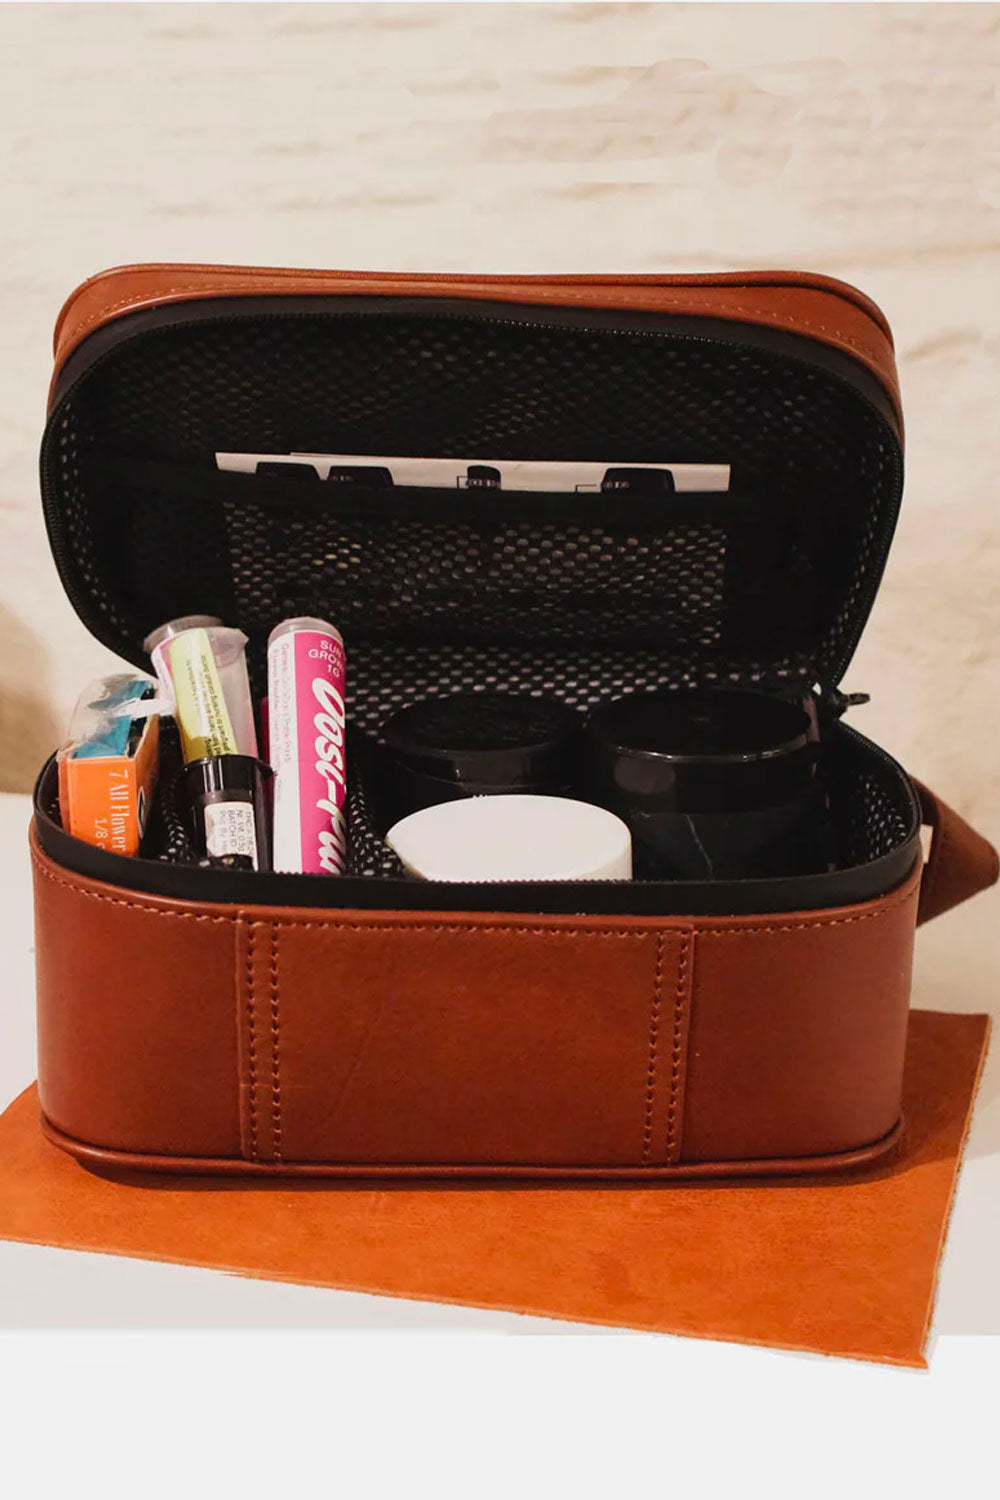 LEATHER WEED STORAGE CADDY